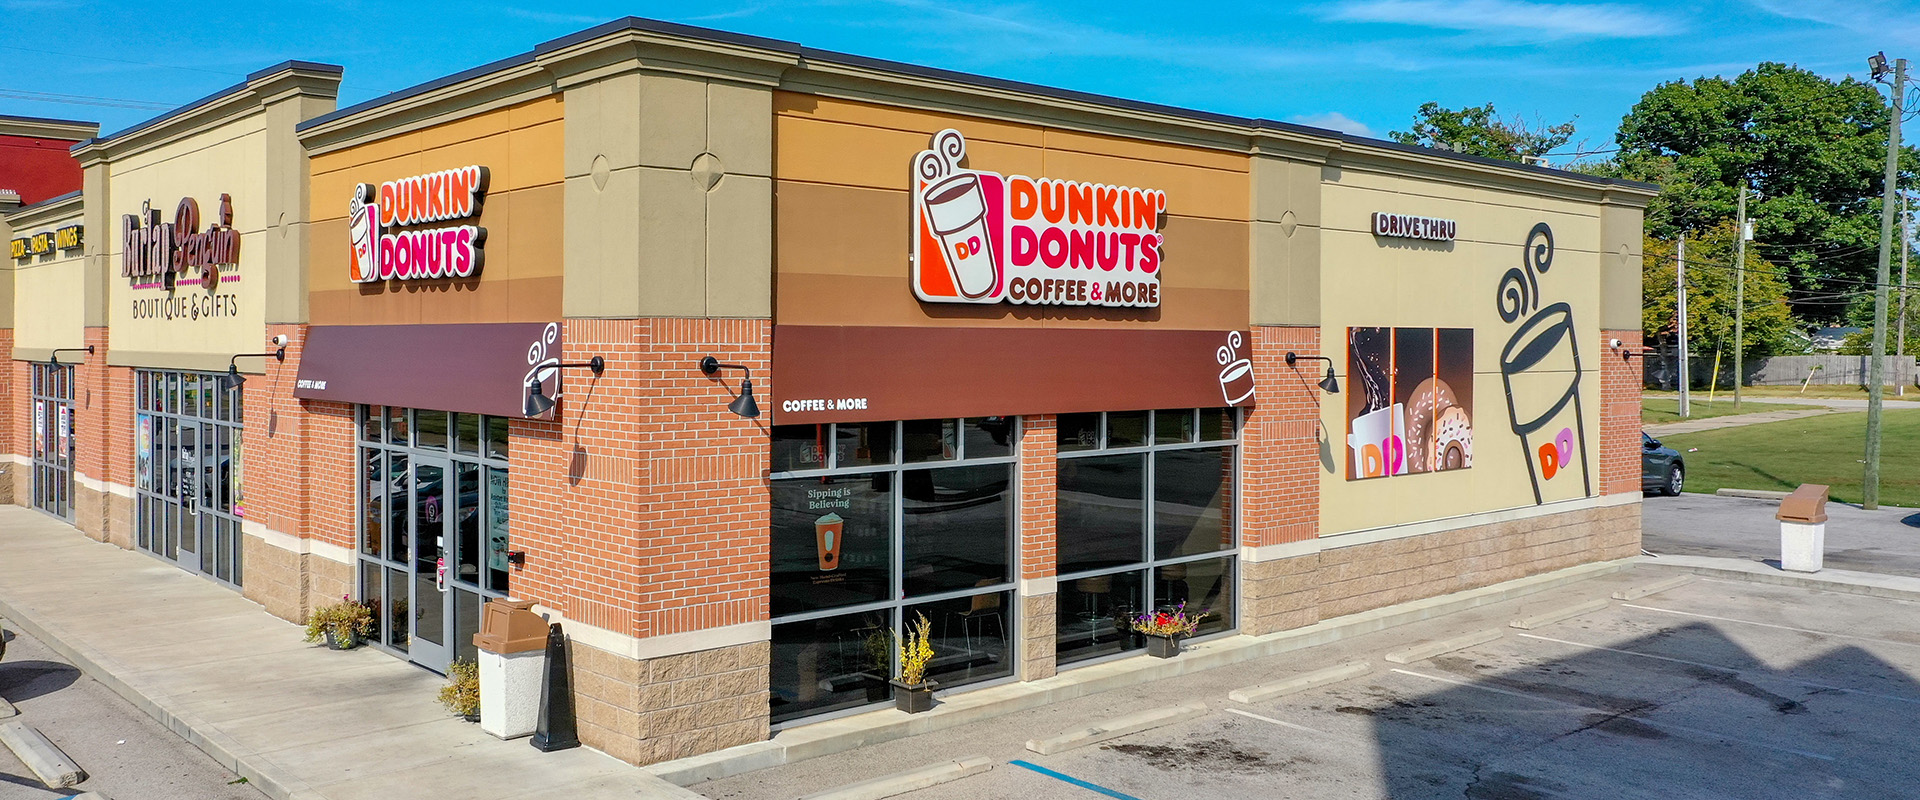 Dunkin Donuts, commercial construction build by Keymark Construction